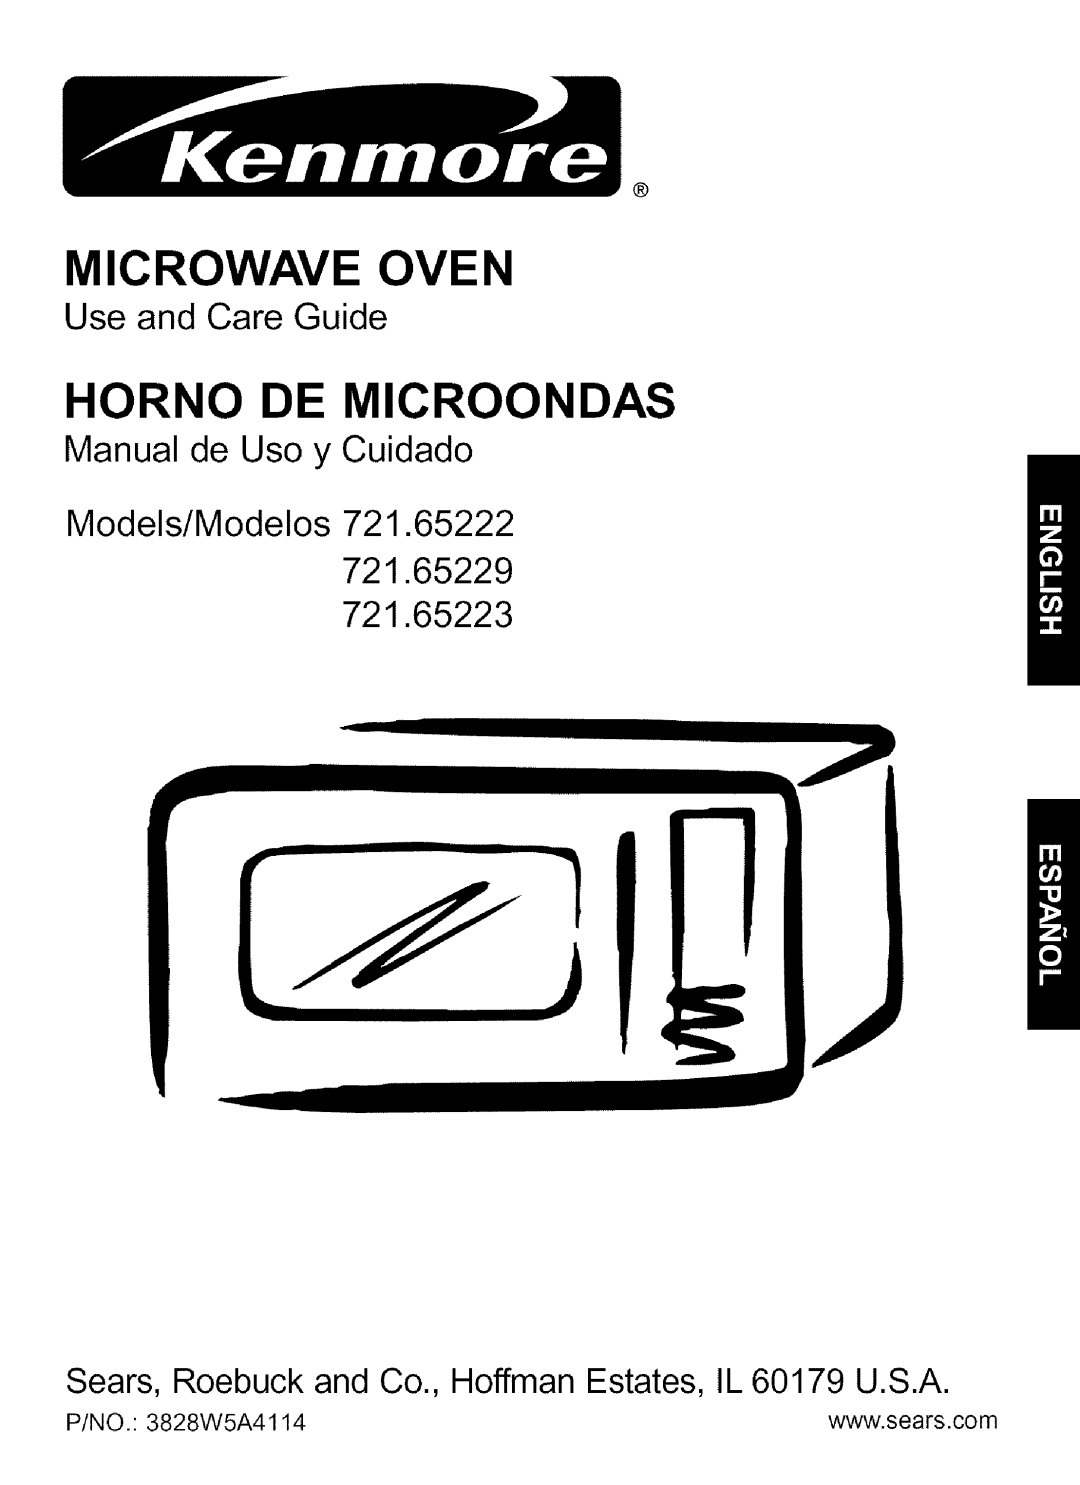 Kenmore 721.65222, 721.65229 manual P/NO. 3828W5A4114, Microwave Oven, Horno De Microondas, Use and Care Guide, 721.65223 